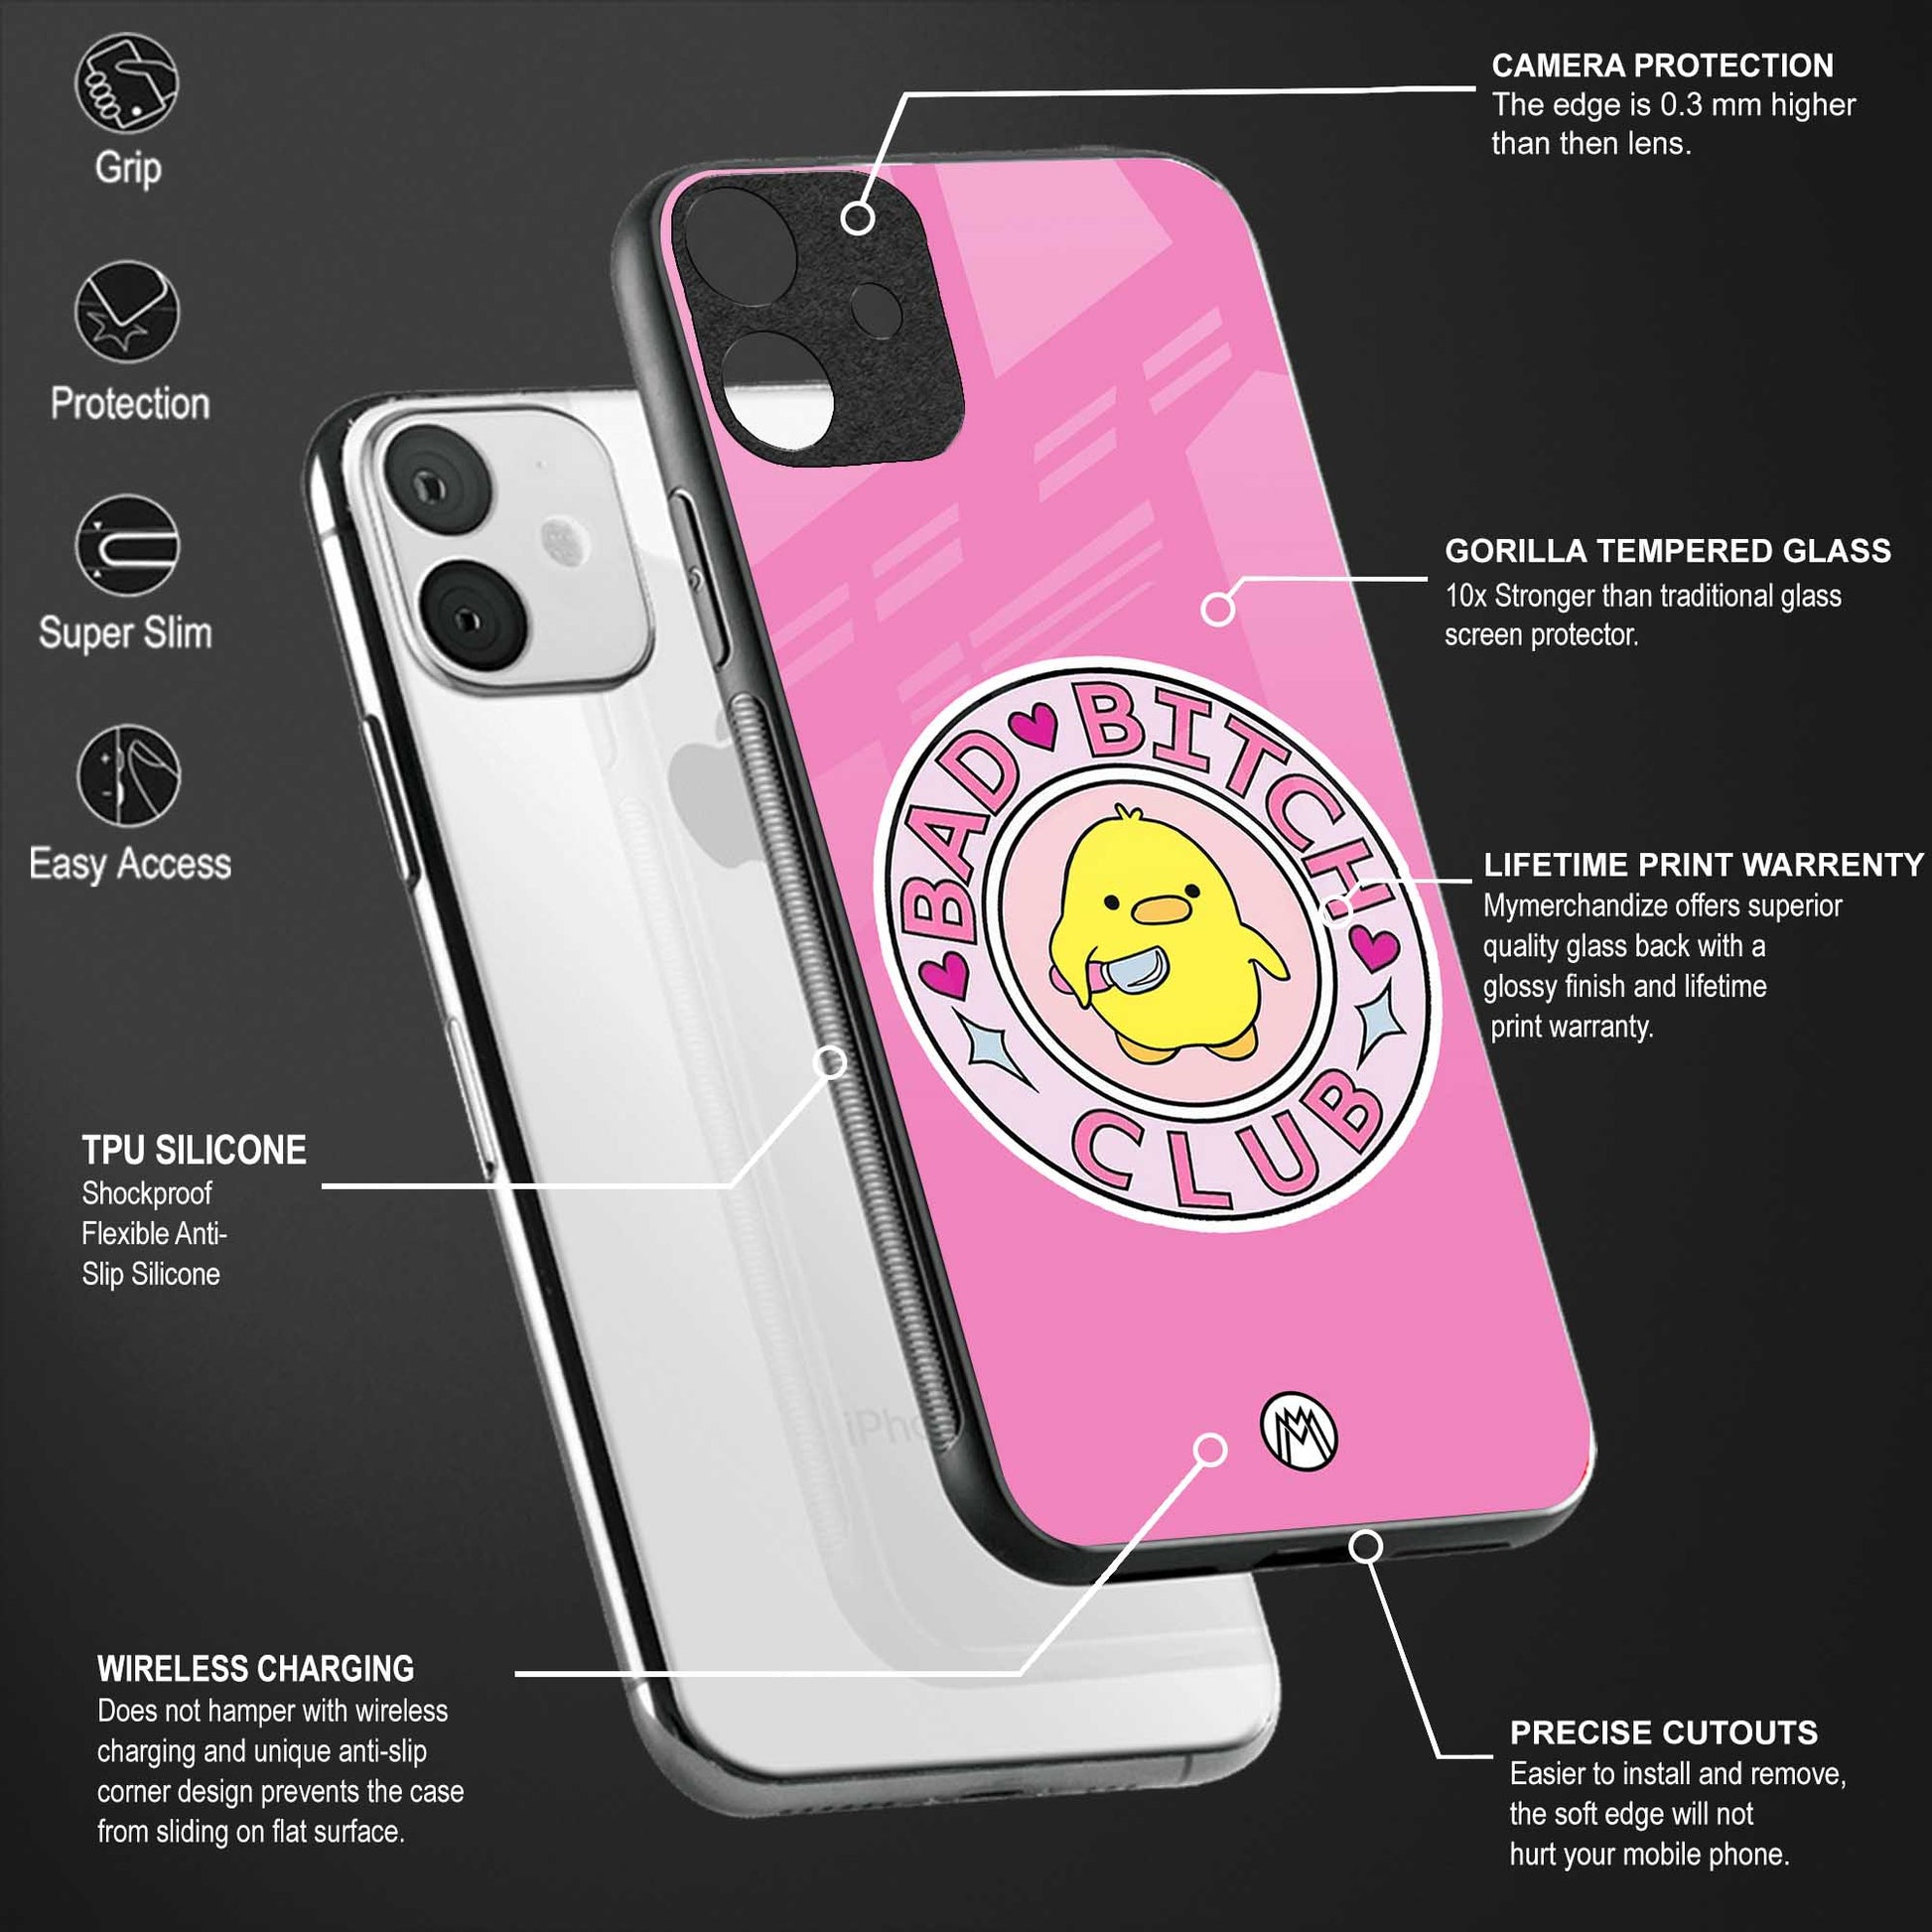 bad bitch club back phone cover | glass case for samsung galaxy a53 5g